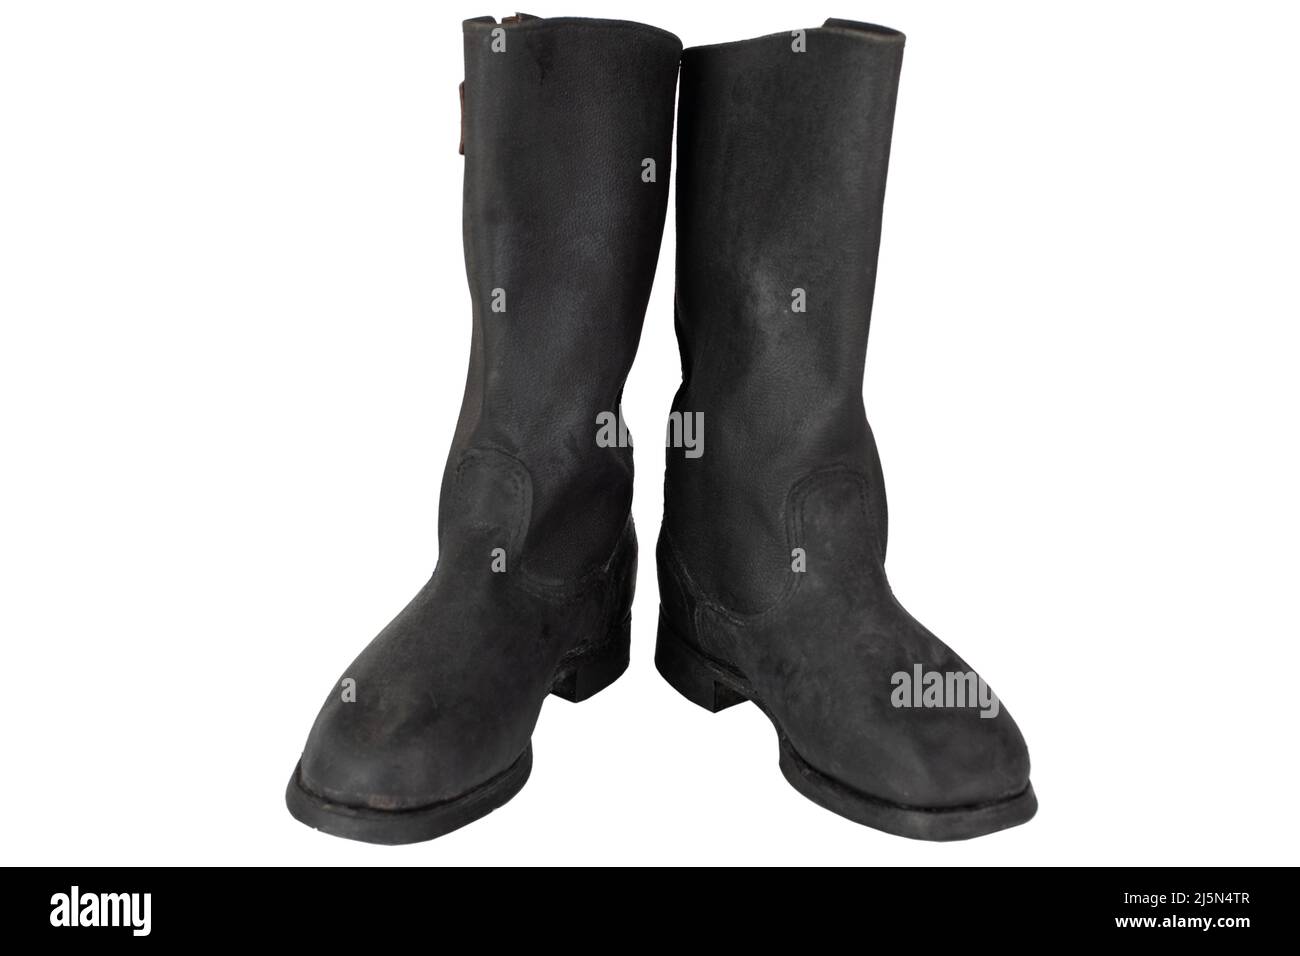 Kirza boots. Boots made from artificial leather. Archaic ?ombat boots and part of service dress uniform in Russia and Soviet Union Army for soldiers. Stock Photo